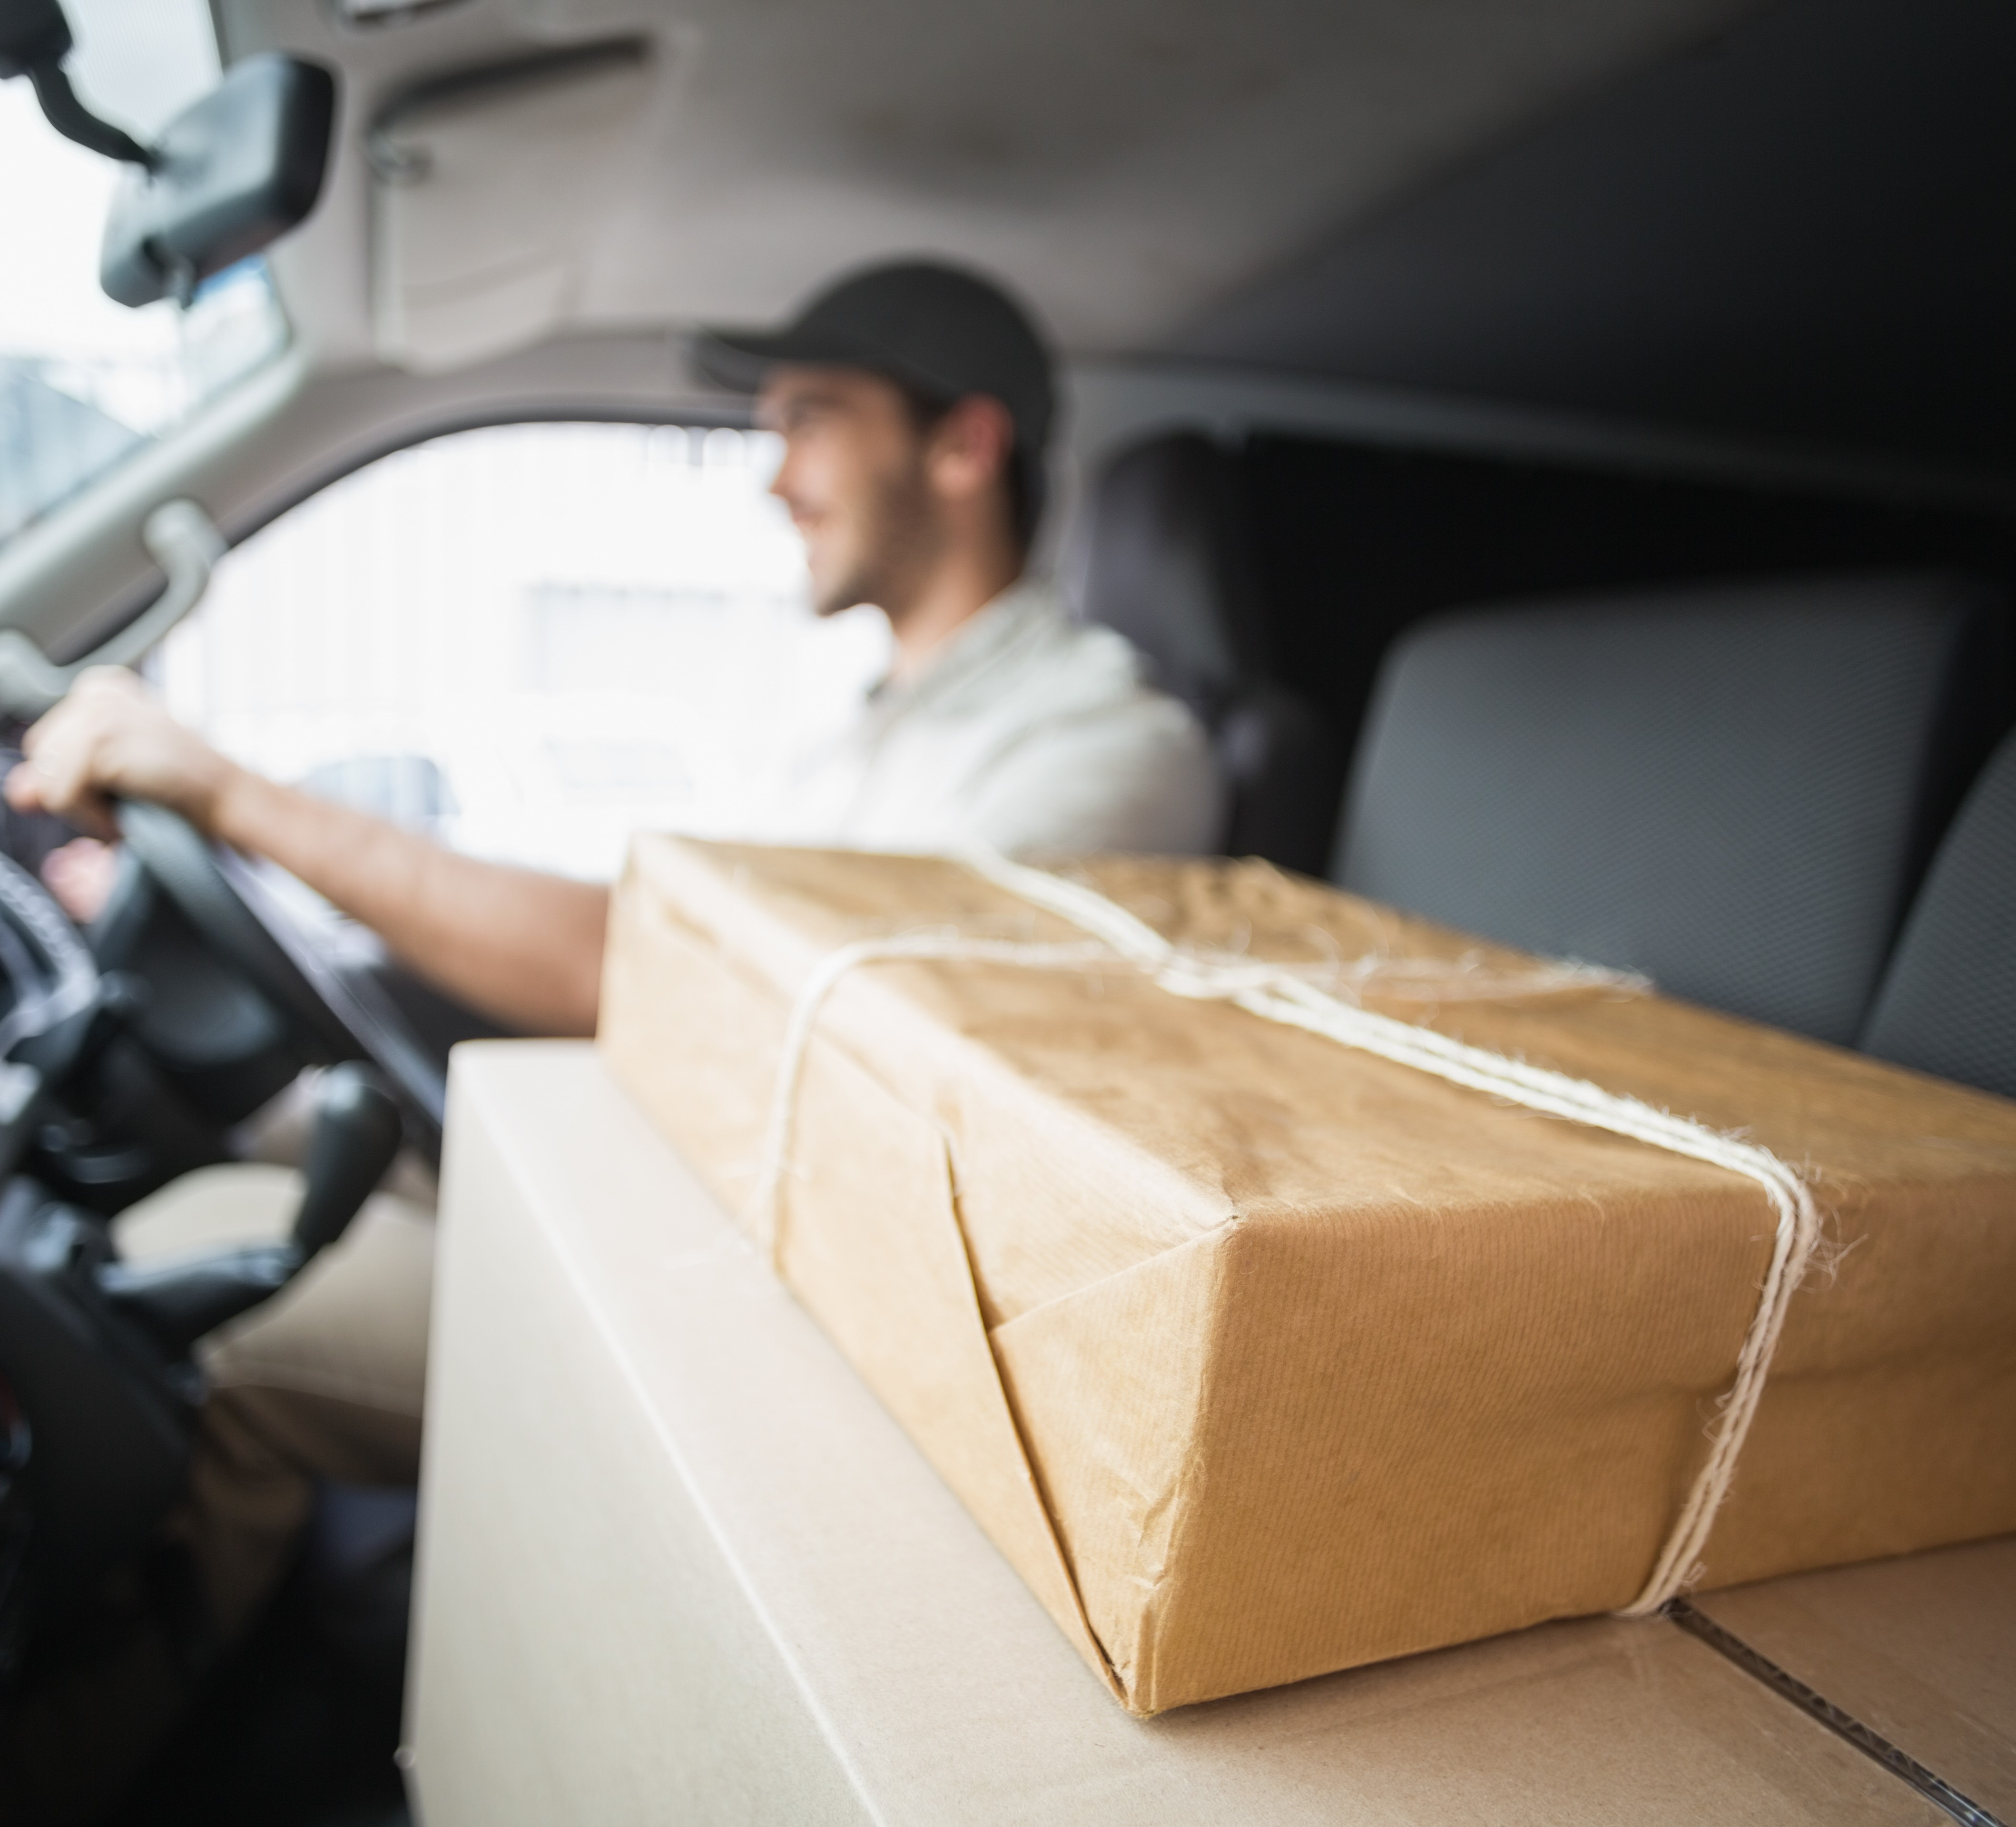 Using robots, parcels with addresses in close proximity to each other can be grouped together, so individual drivers can deliver more while travelling a shorter route. (Source: shutterstock_216667807)